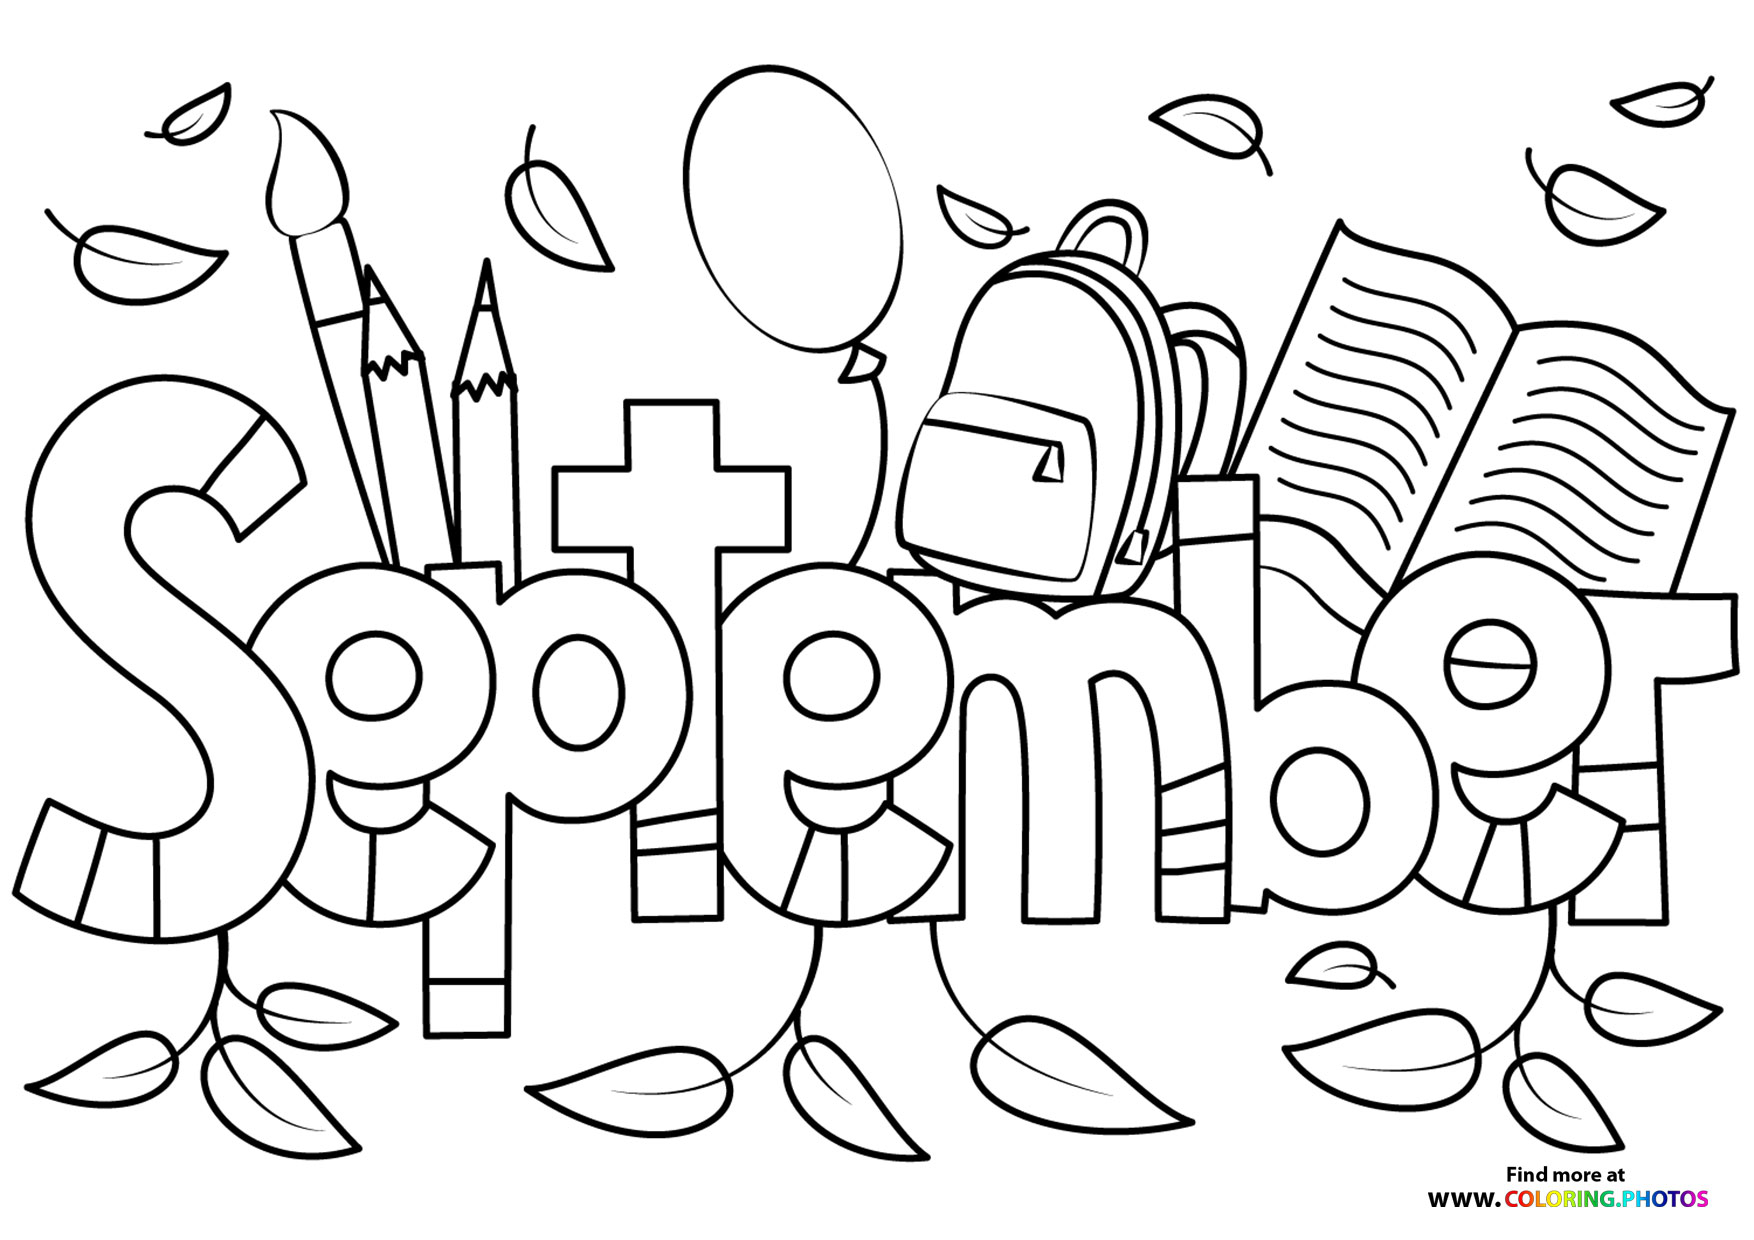 September autumn text sign - Coloring Pages for kids